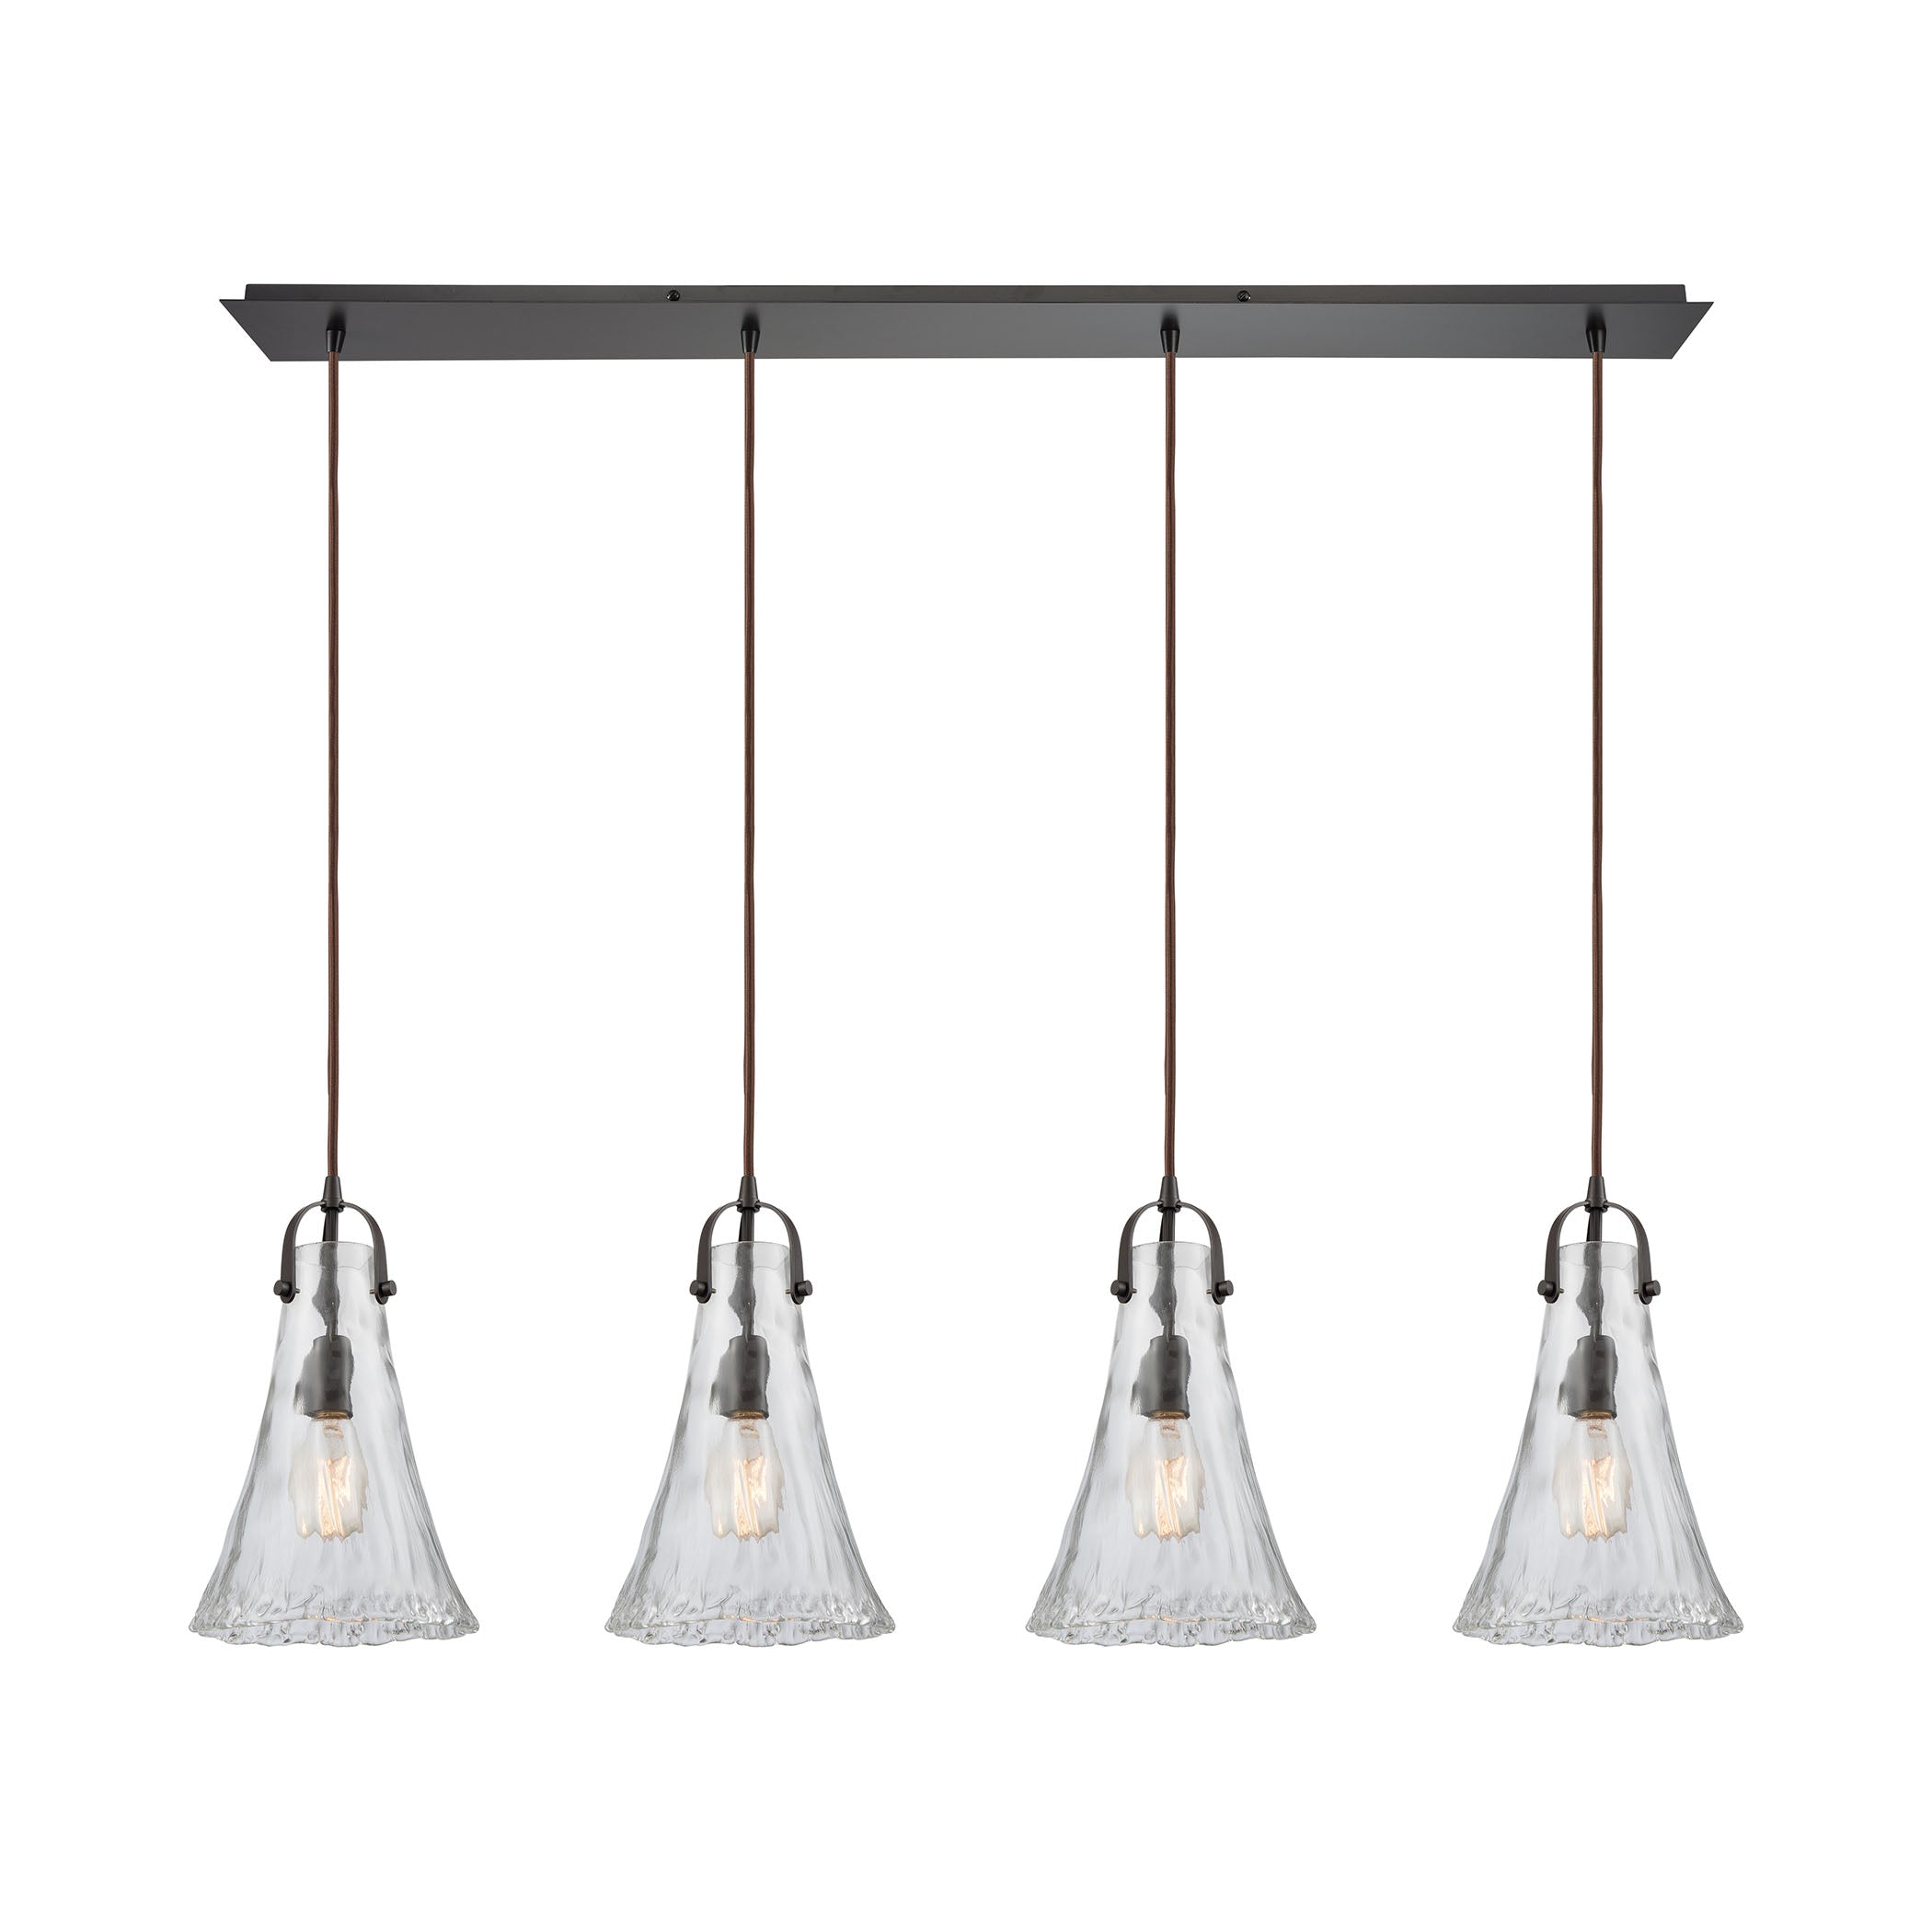 ELK Lighting 10555/4LP Hand Formed Glass 4-Light Linear Pendant Fixture in Oiled Bronze with Clear Hand-formed Glass